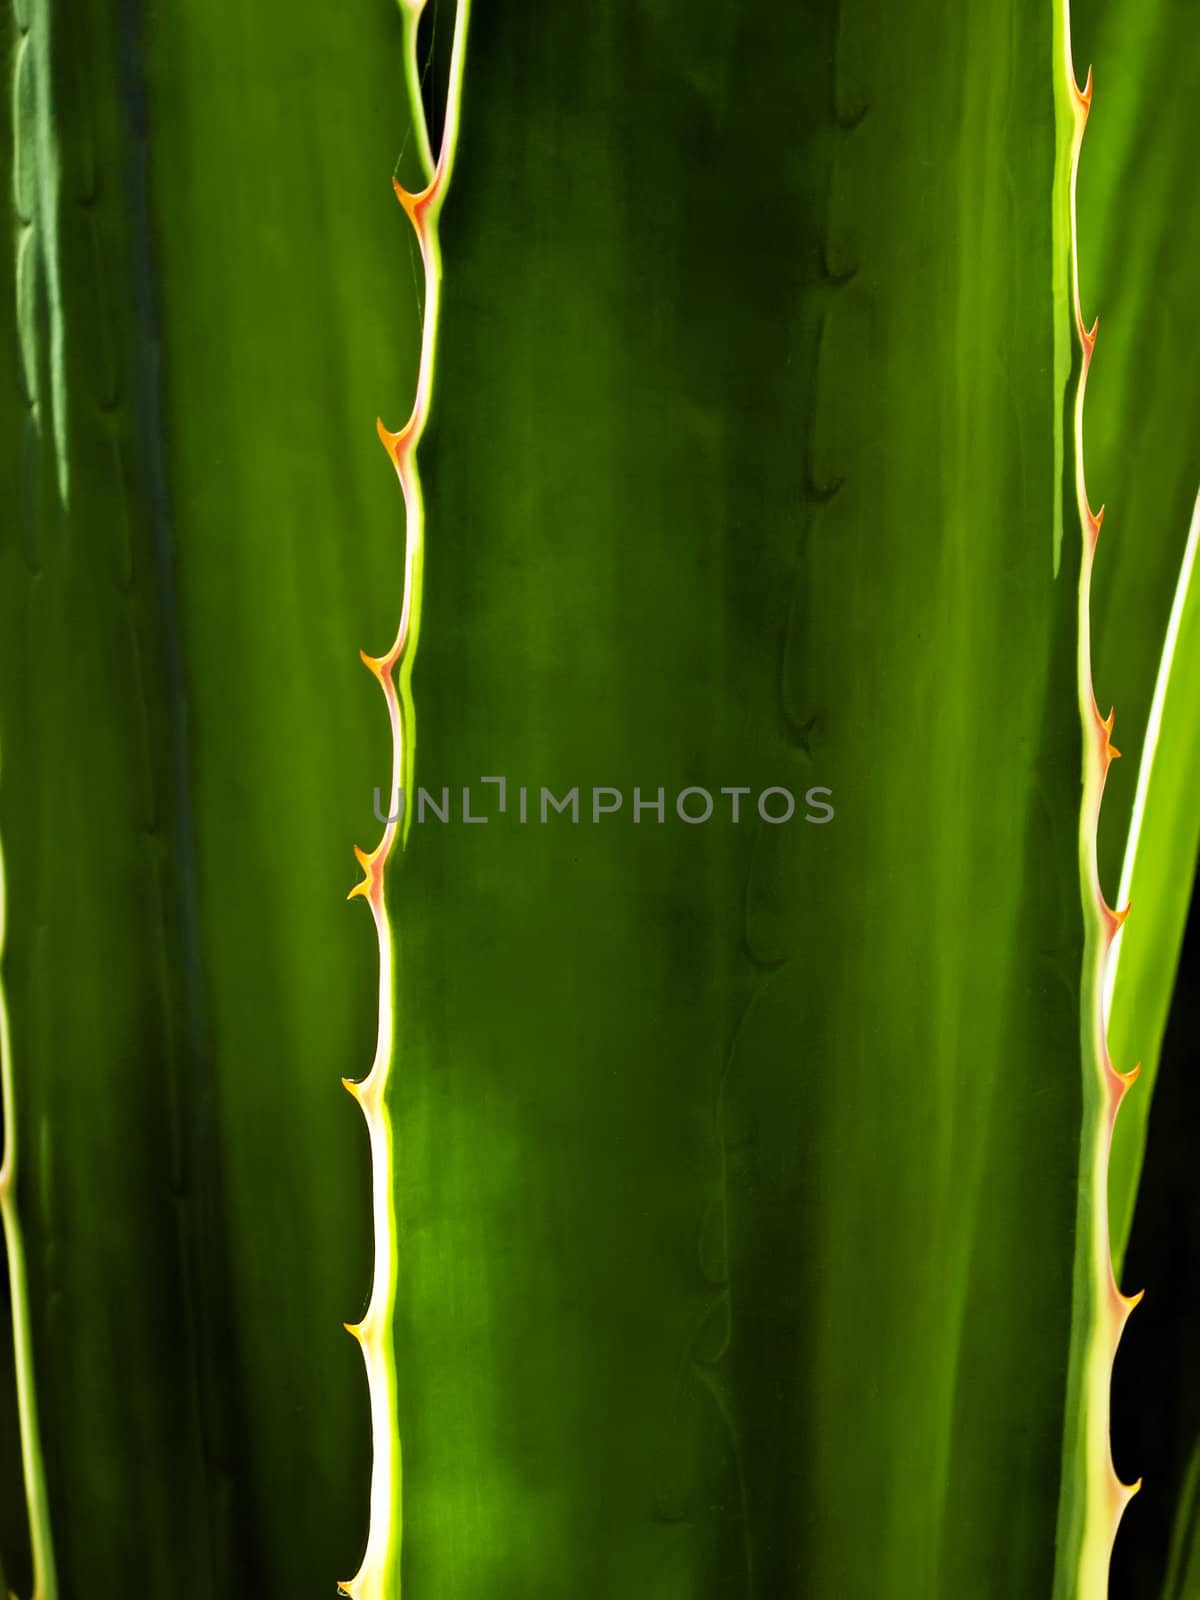 Detail and texture of a beautiful backlighted cactus or aloe leaf